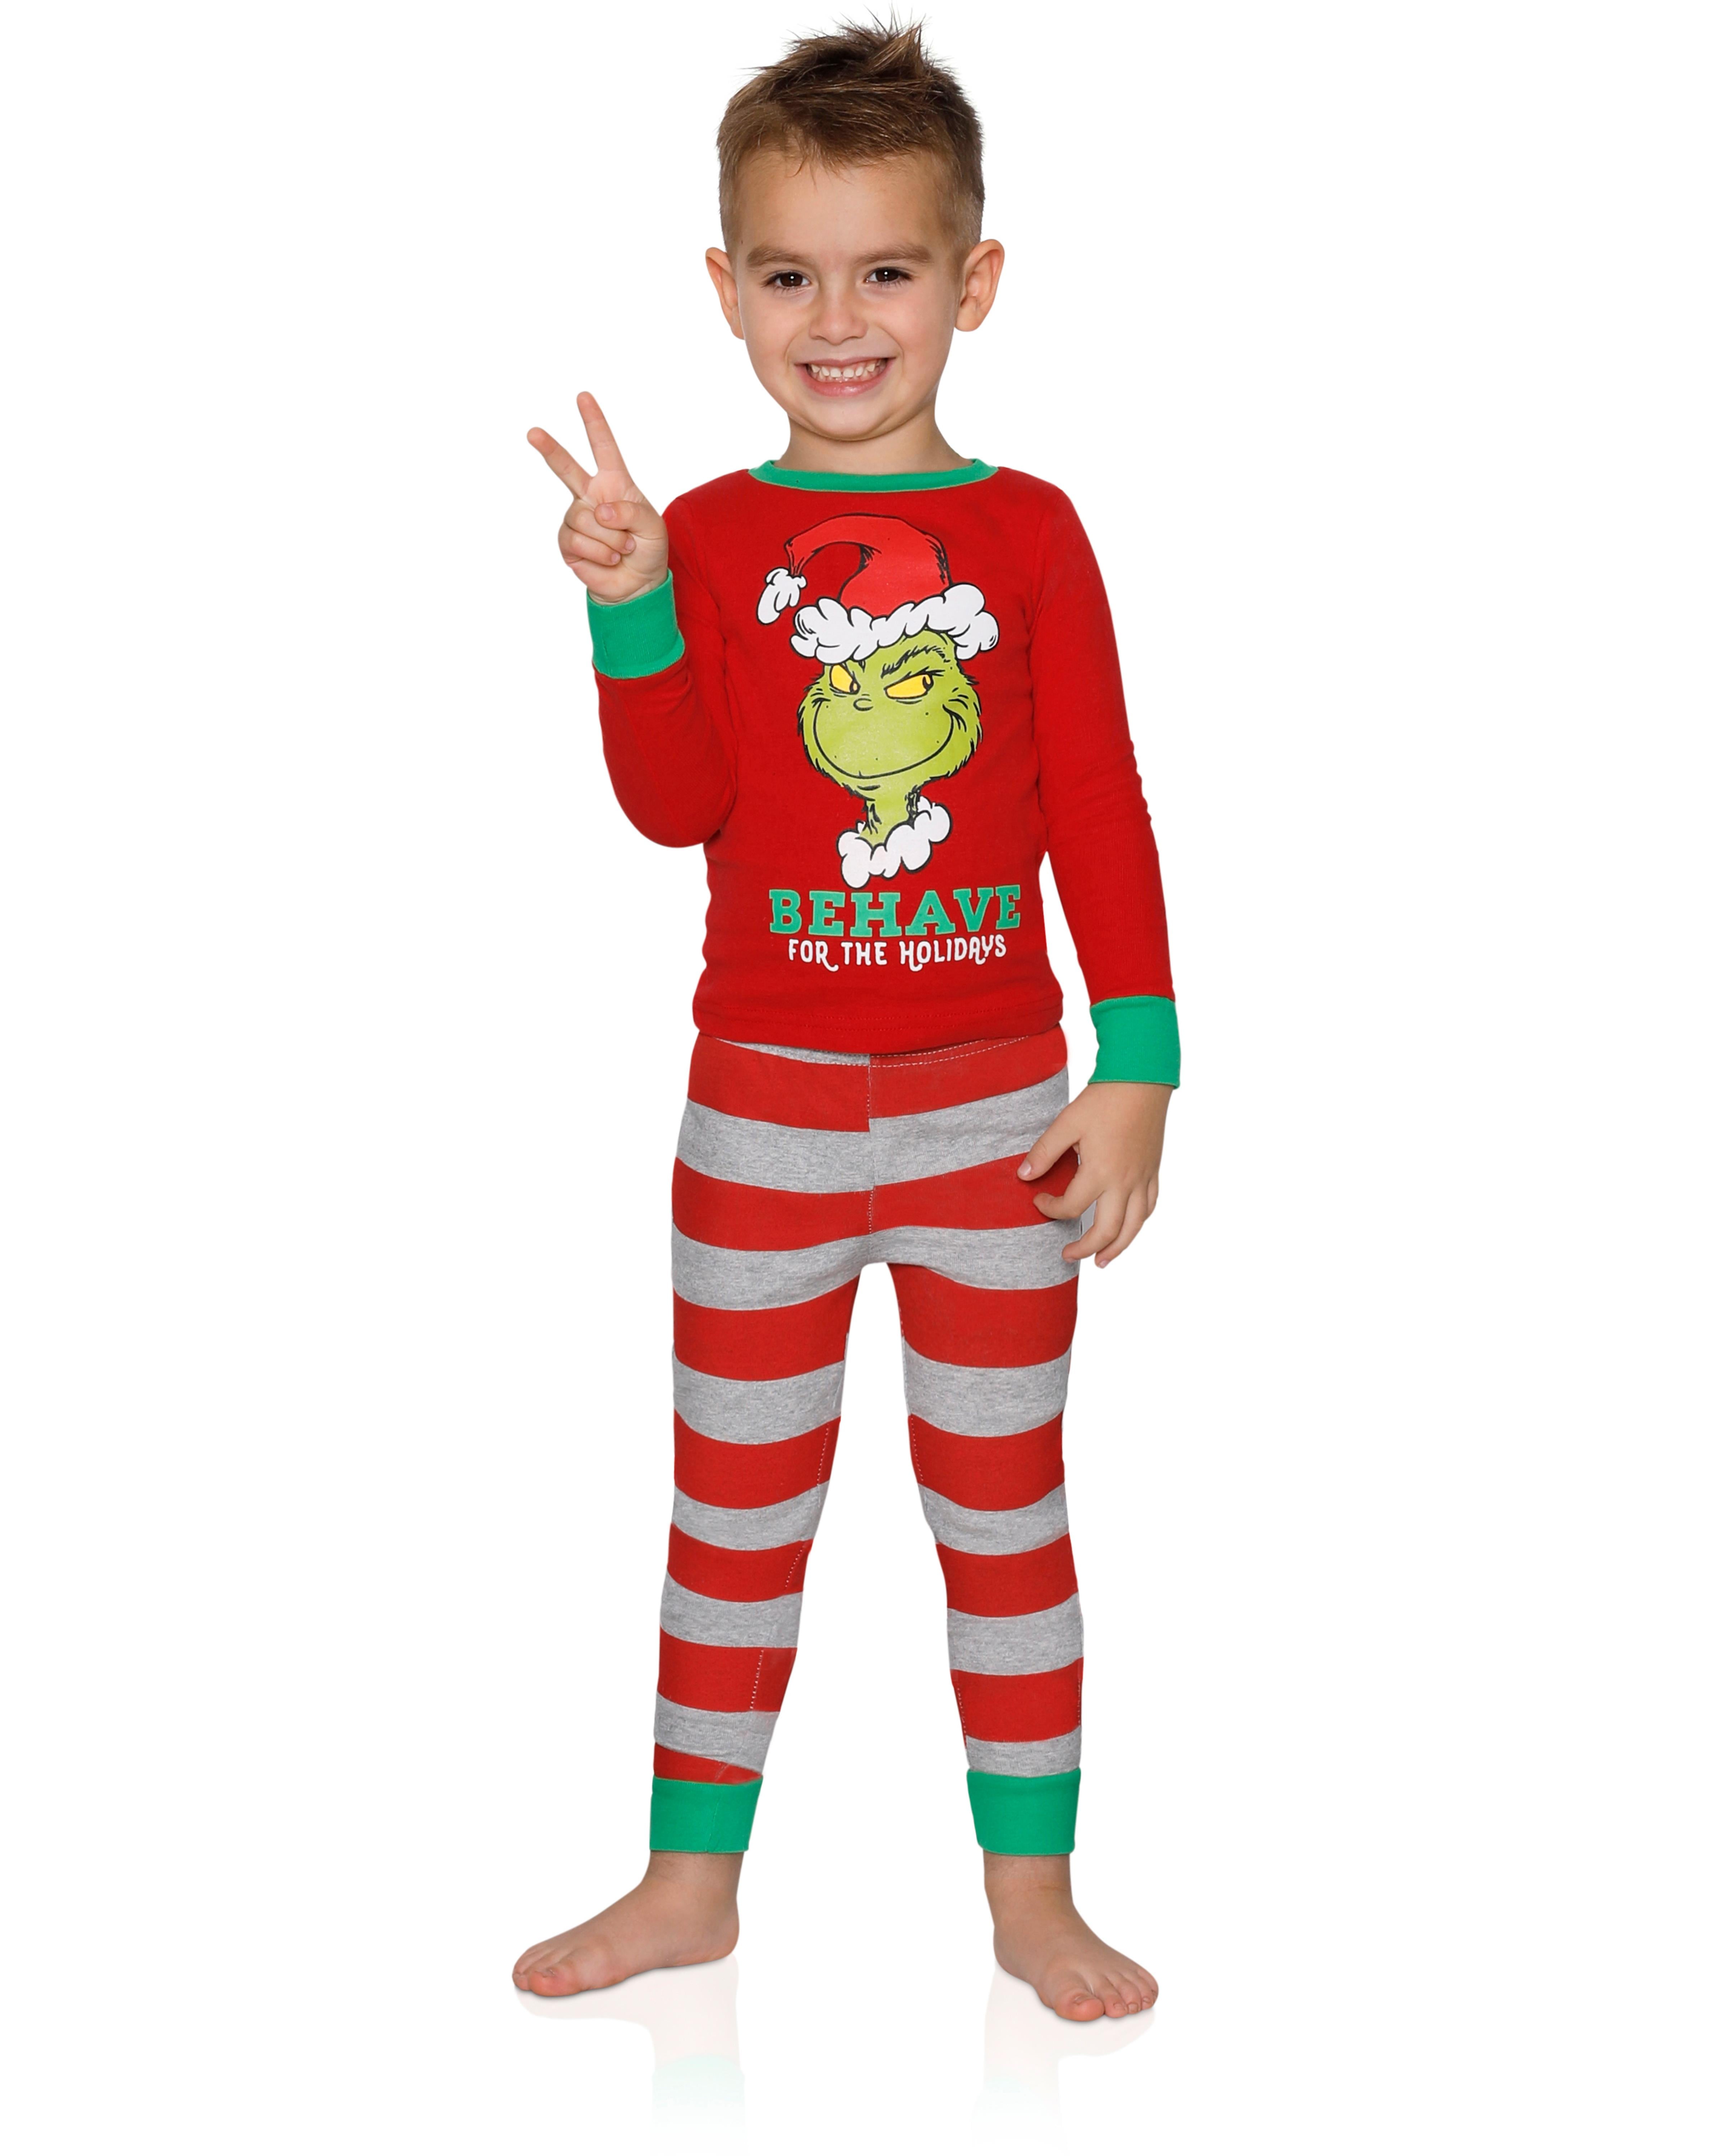 Official The Grinch Red Striped Family Christmas Pyjamas All sizes NO RETURNS 